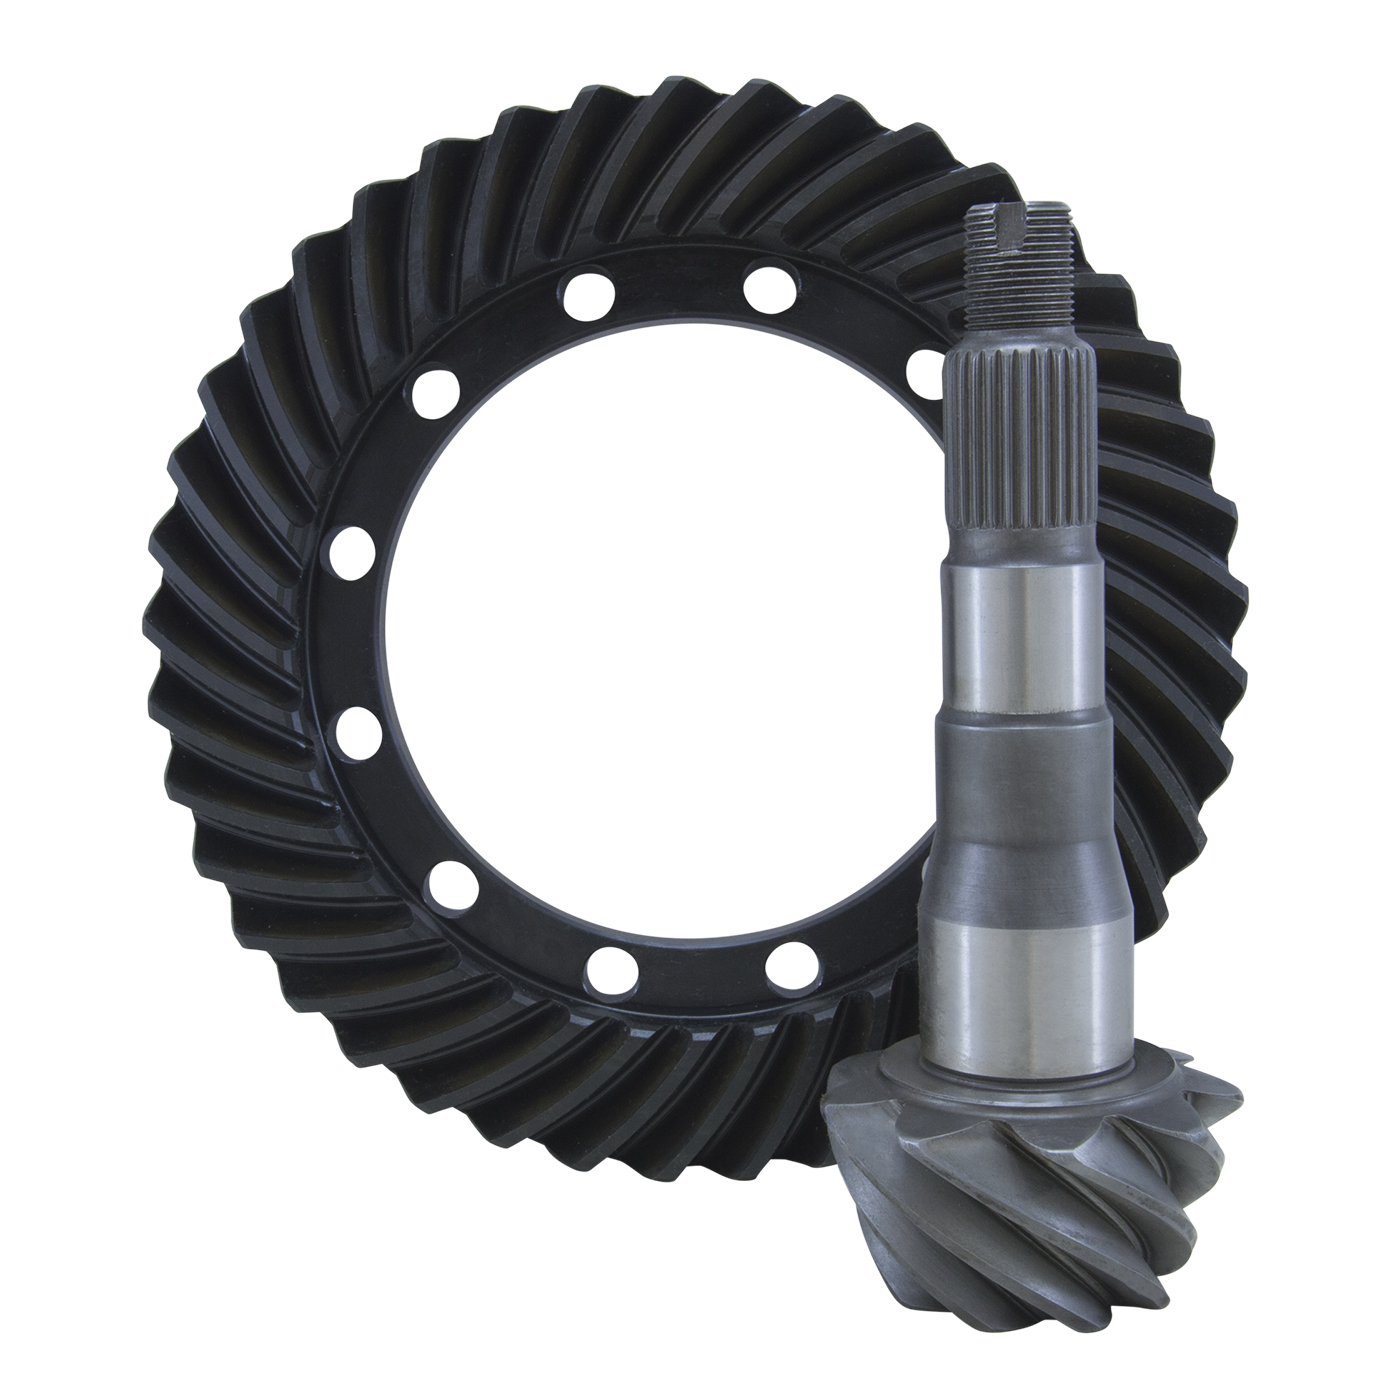 USA Standard Ring & Pinion gear set for Toyota Landcruiser in a 4.88 ratio